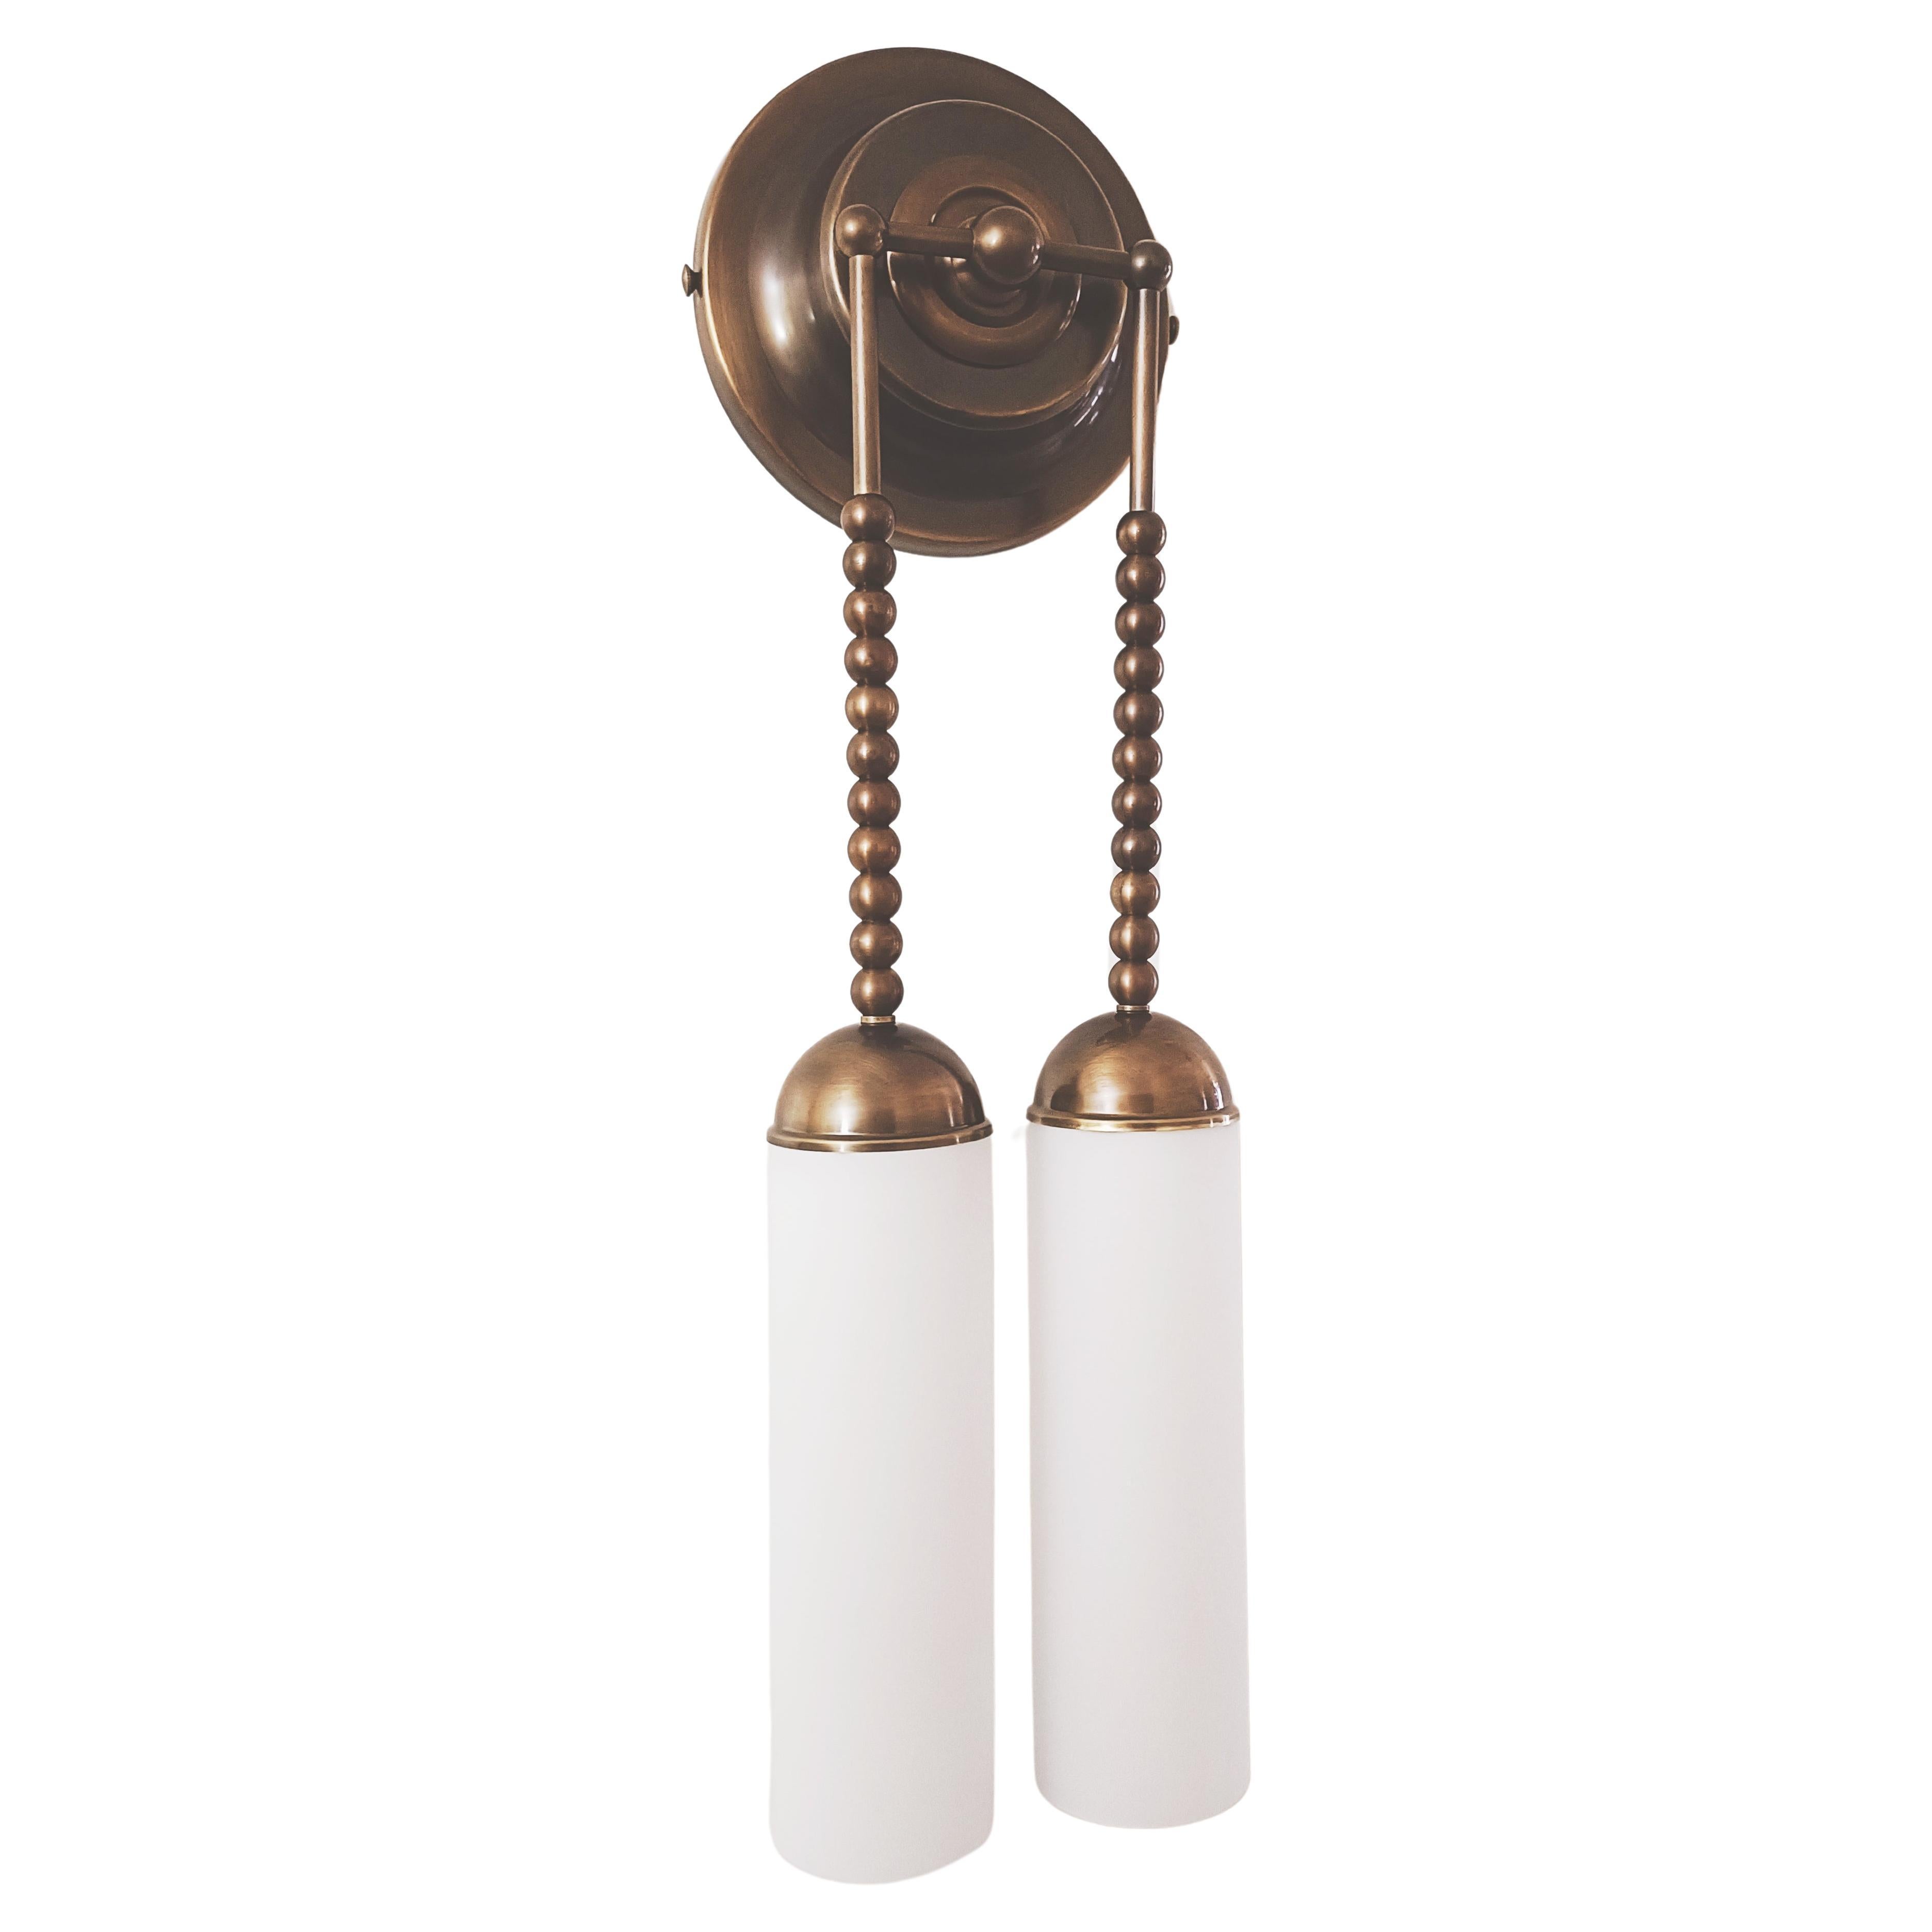 Gran - Set of two large - 69 cm (27 ") -  Brass Double Sconces by Candas Design For Sale